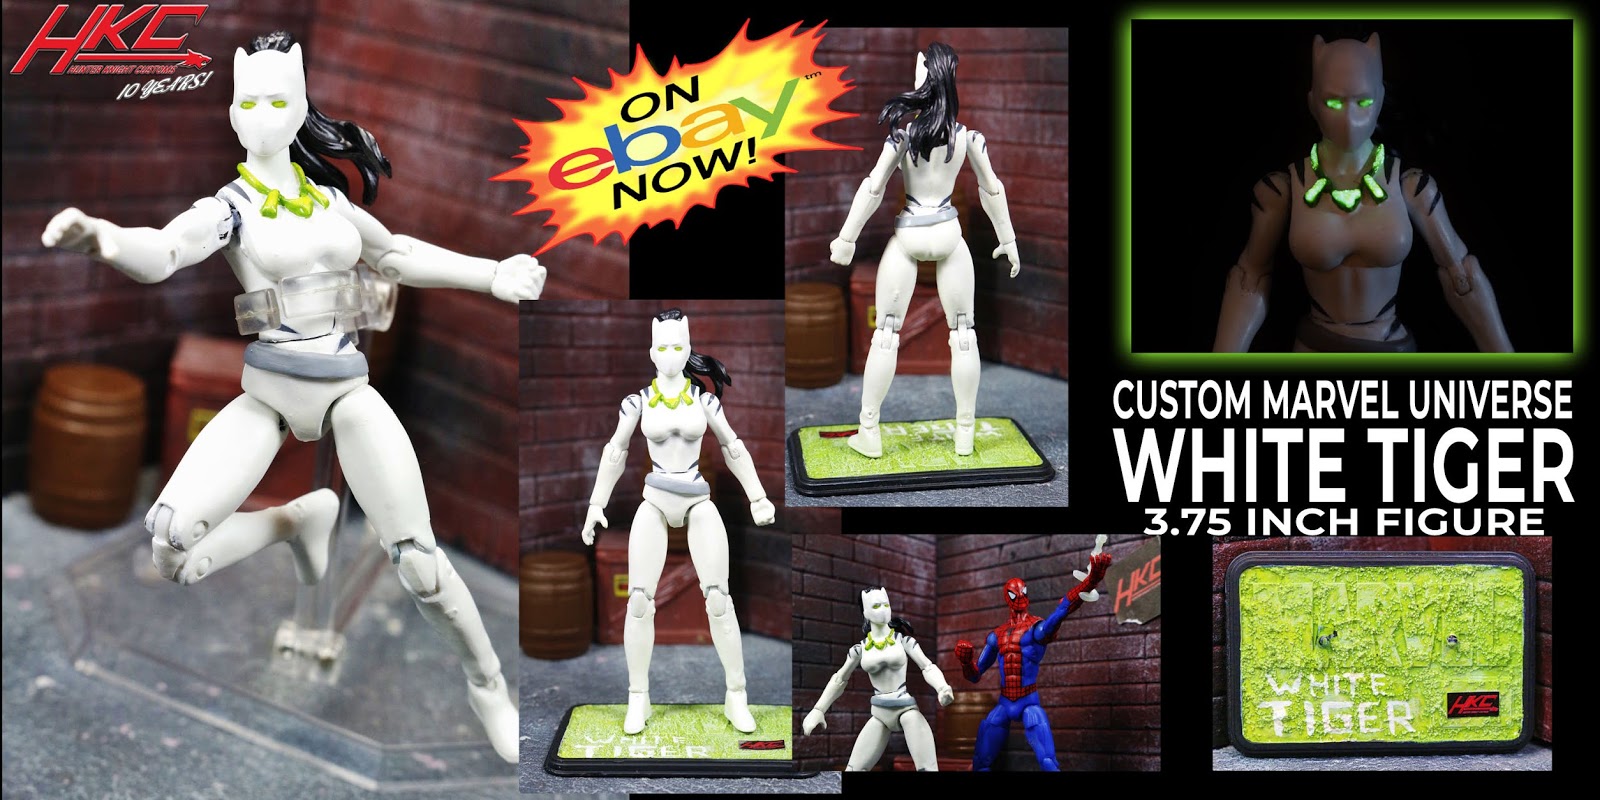 Next in my Marvel Universe custom action figures is White Tiger! 